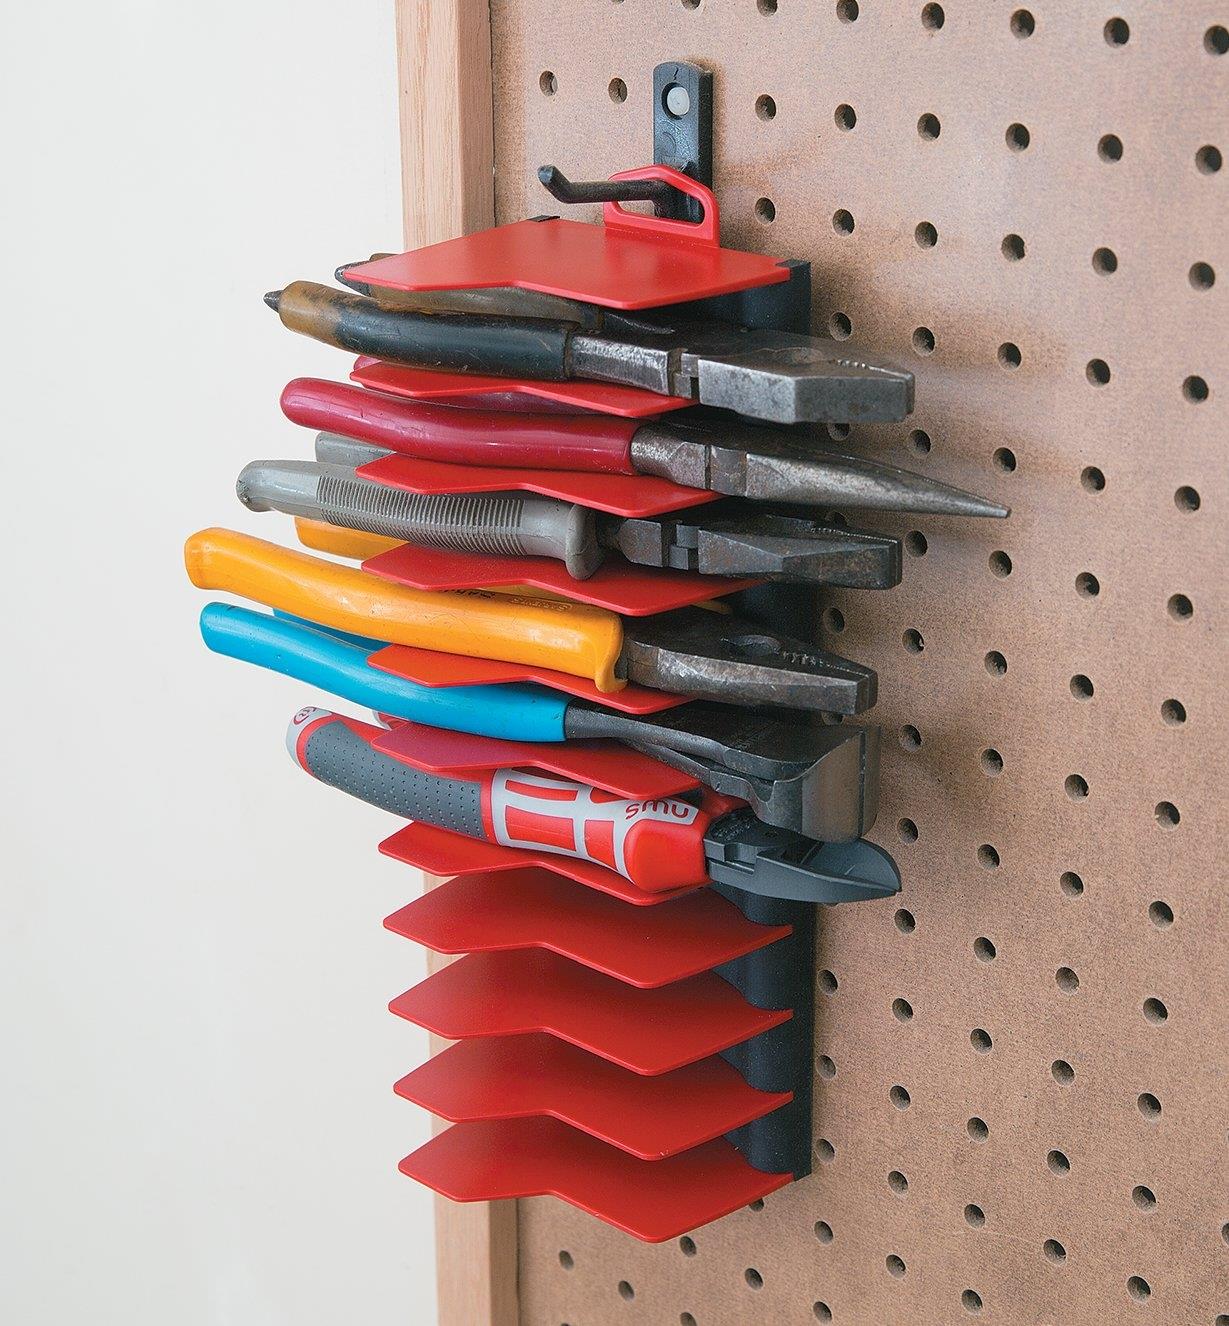 Various plyers held in a Pliers Organizer on a pegboard